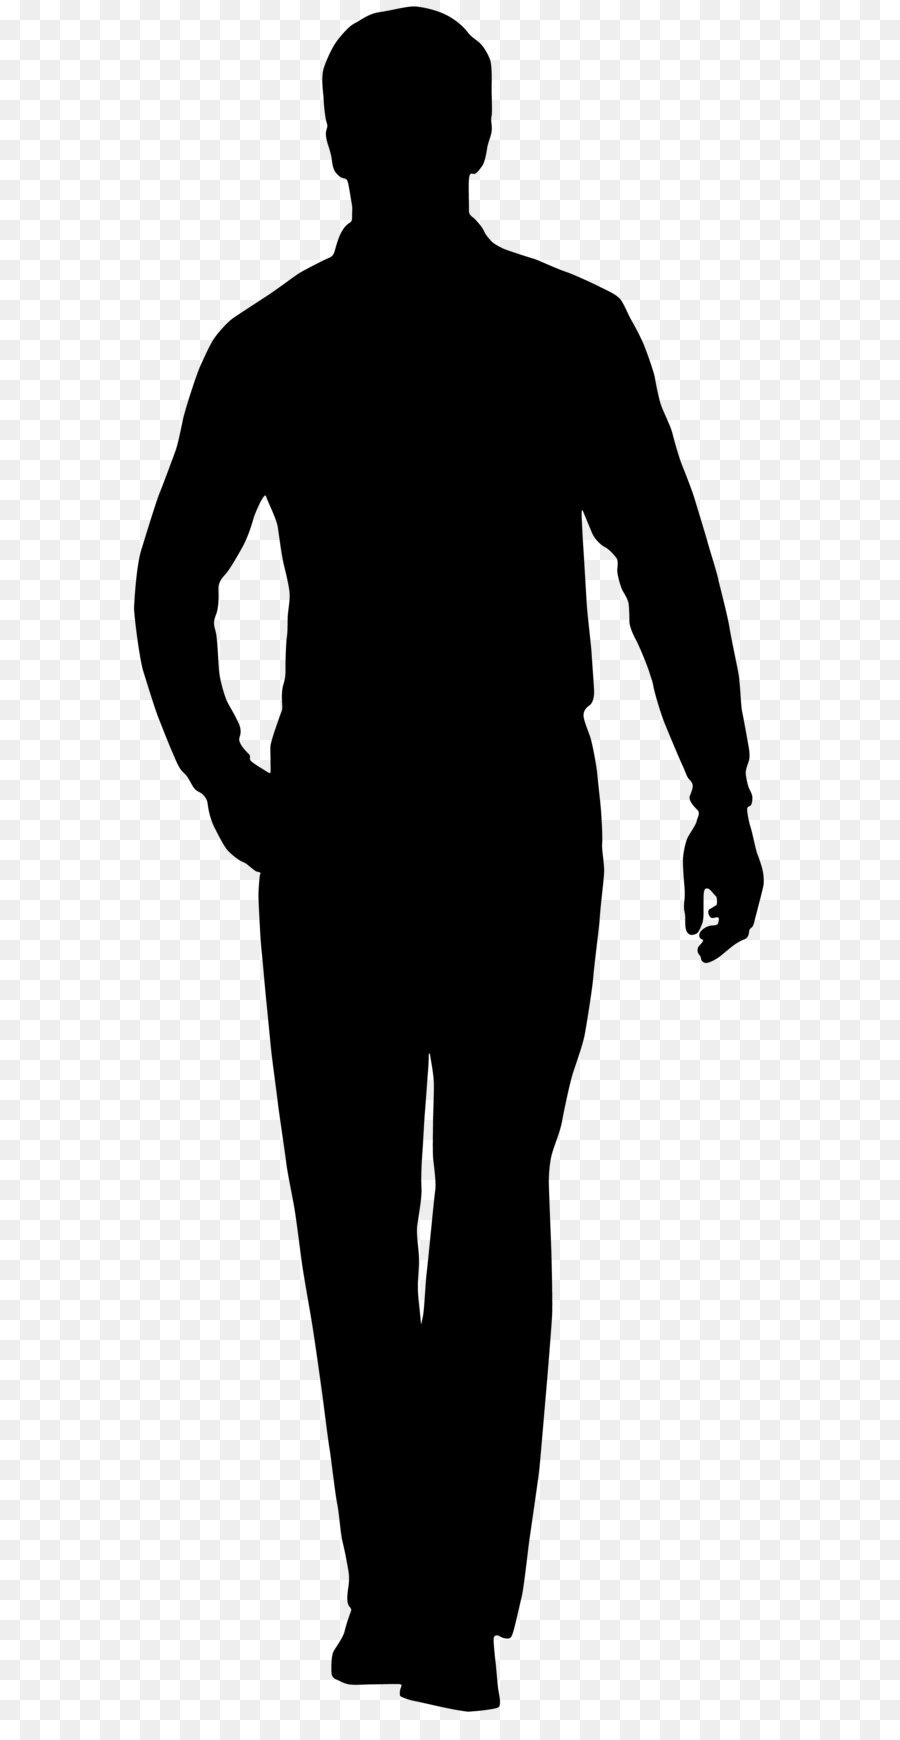 Silhouette Clip art - Man Silhouette PNG Clip Art png download - 2767*8000 - Free Transparent Silhouette png Download.